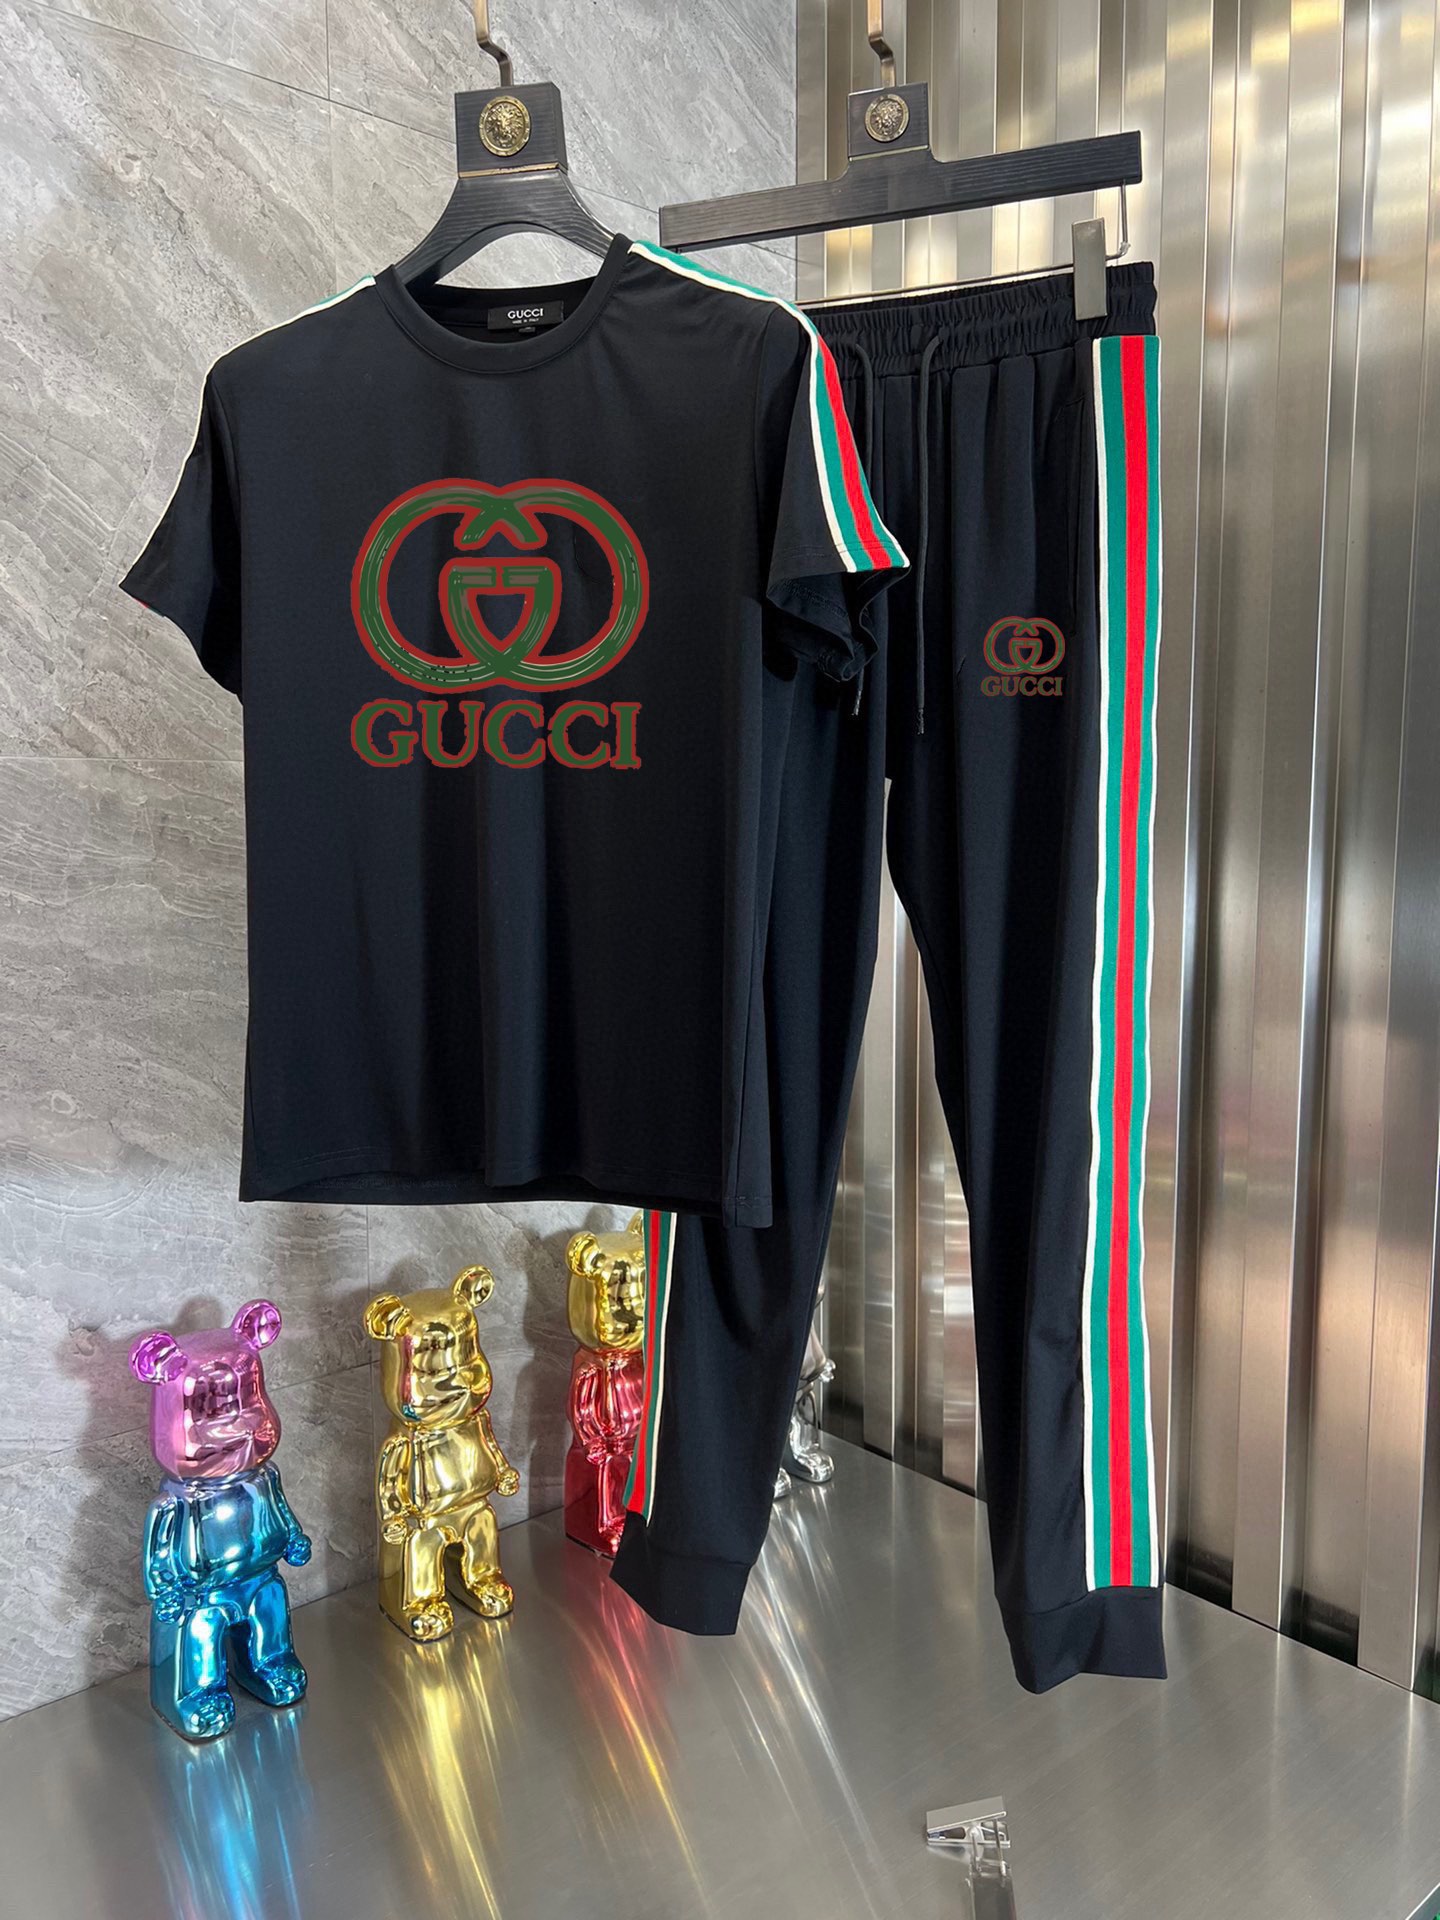 Gucci Clothing T-Shirt Two Piece Outfits & Matching Sets Buy Best High-Quality
 Men Summer Collection Fashion Short Sleeve